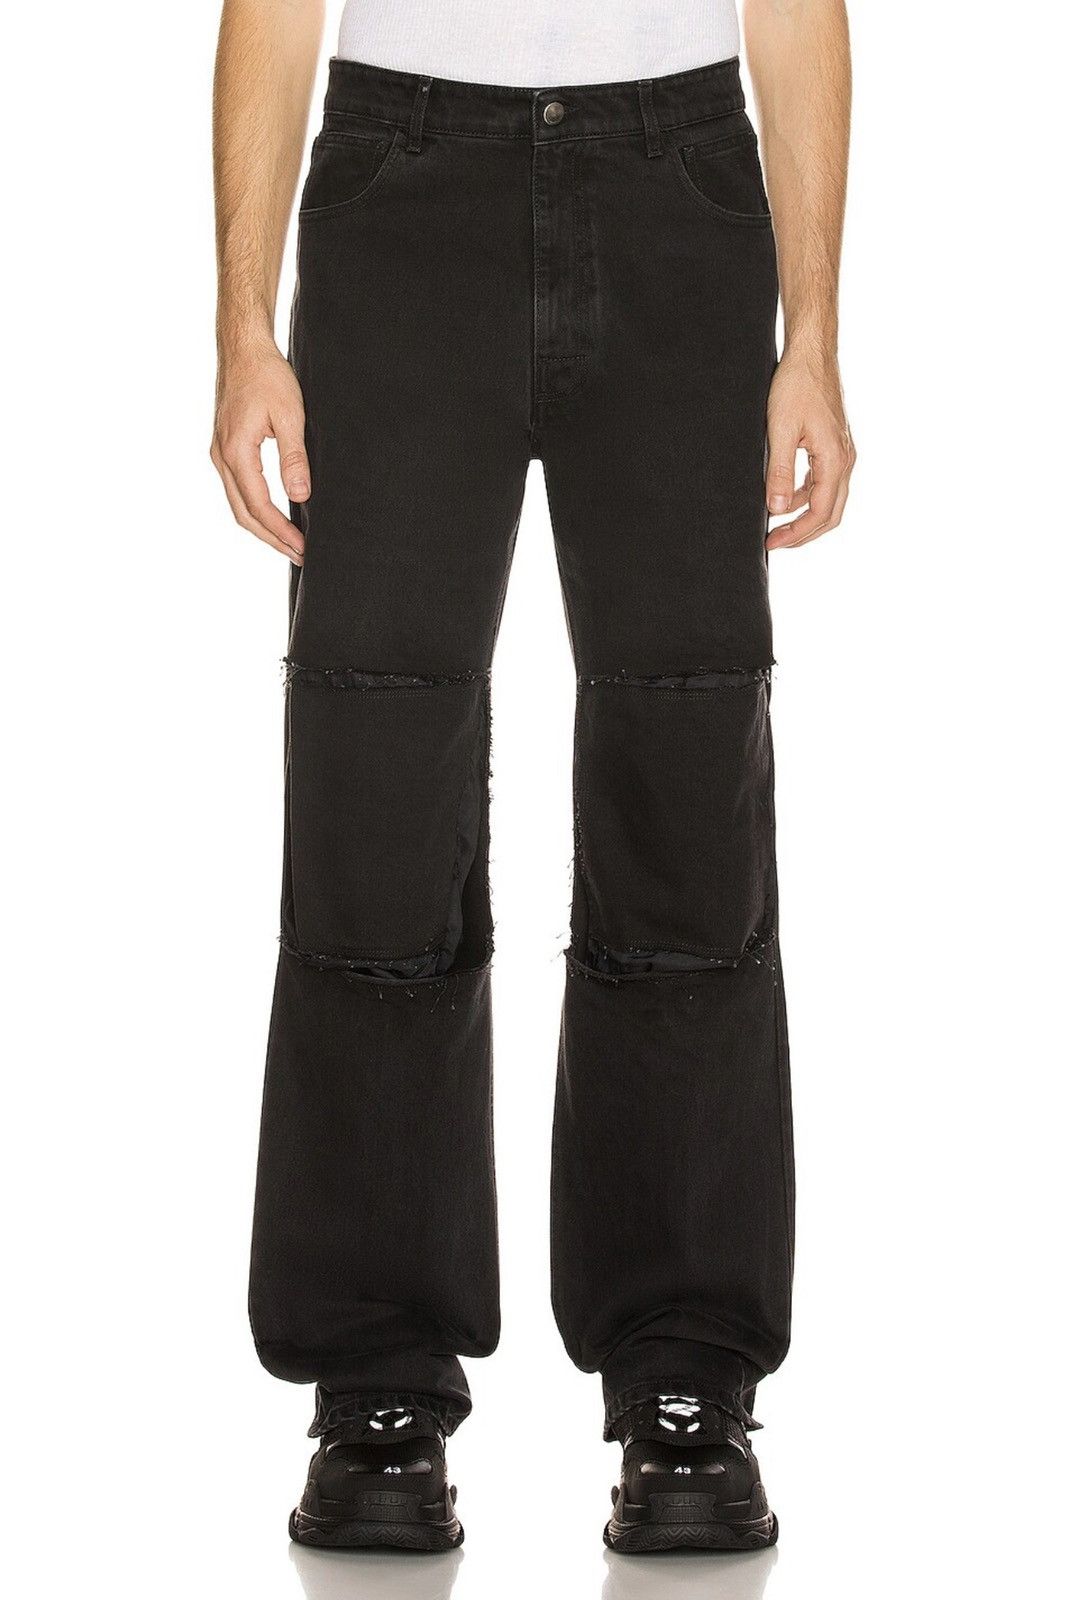 Raf Simons Relaxed Fit Denim Pants With Cut Out Knee Patches | Grailed